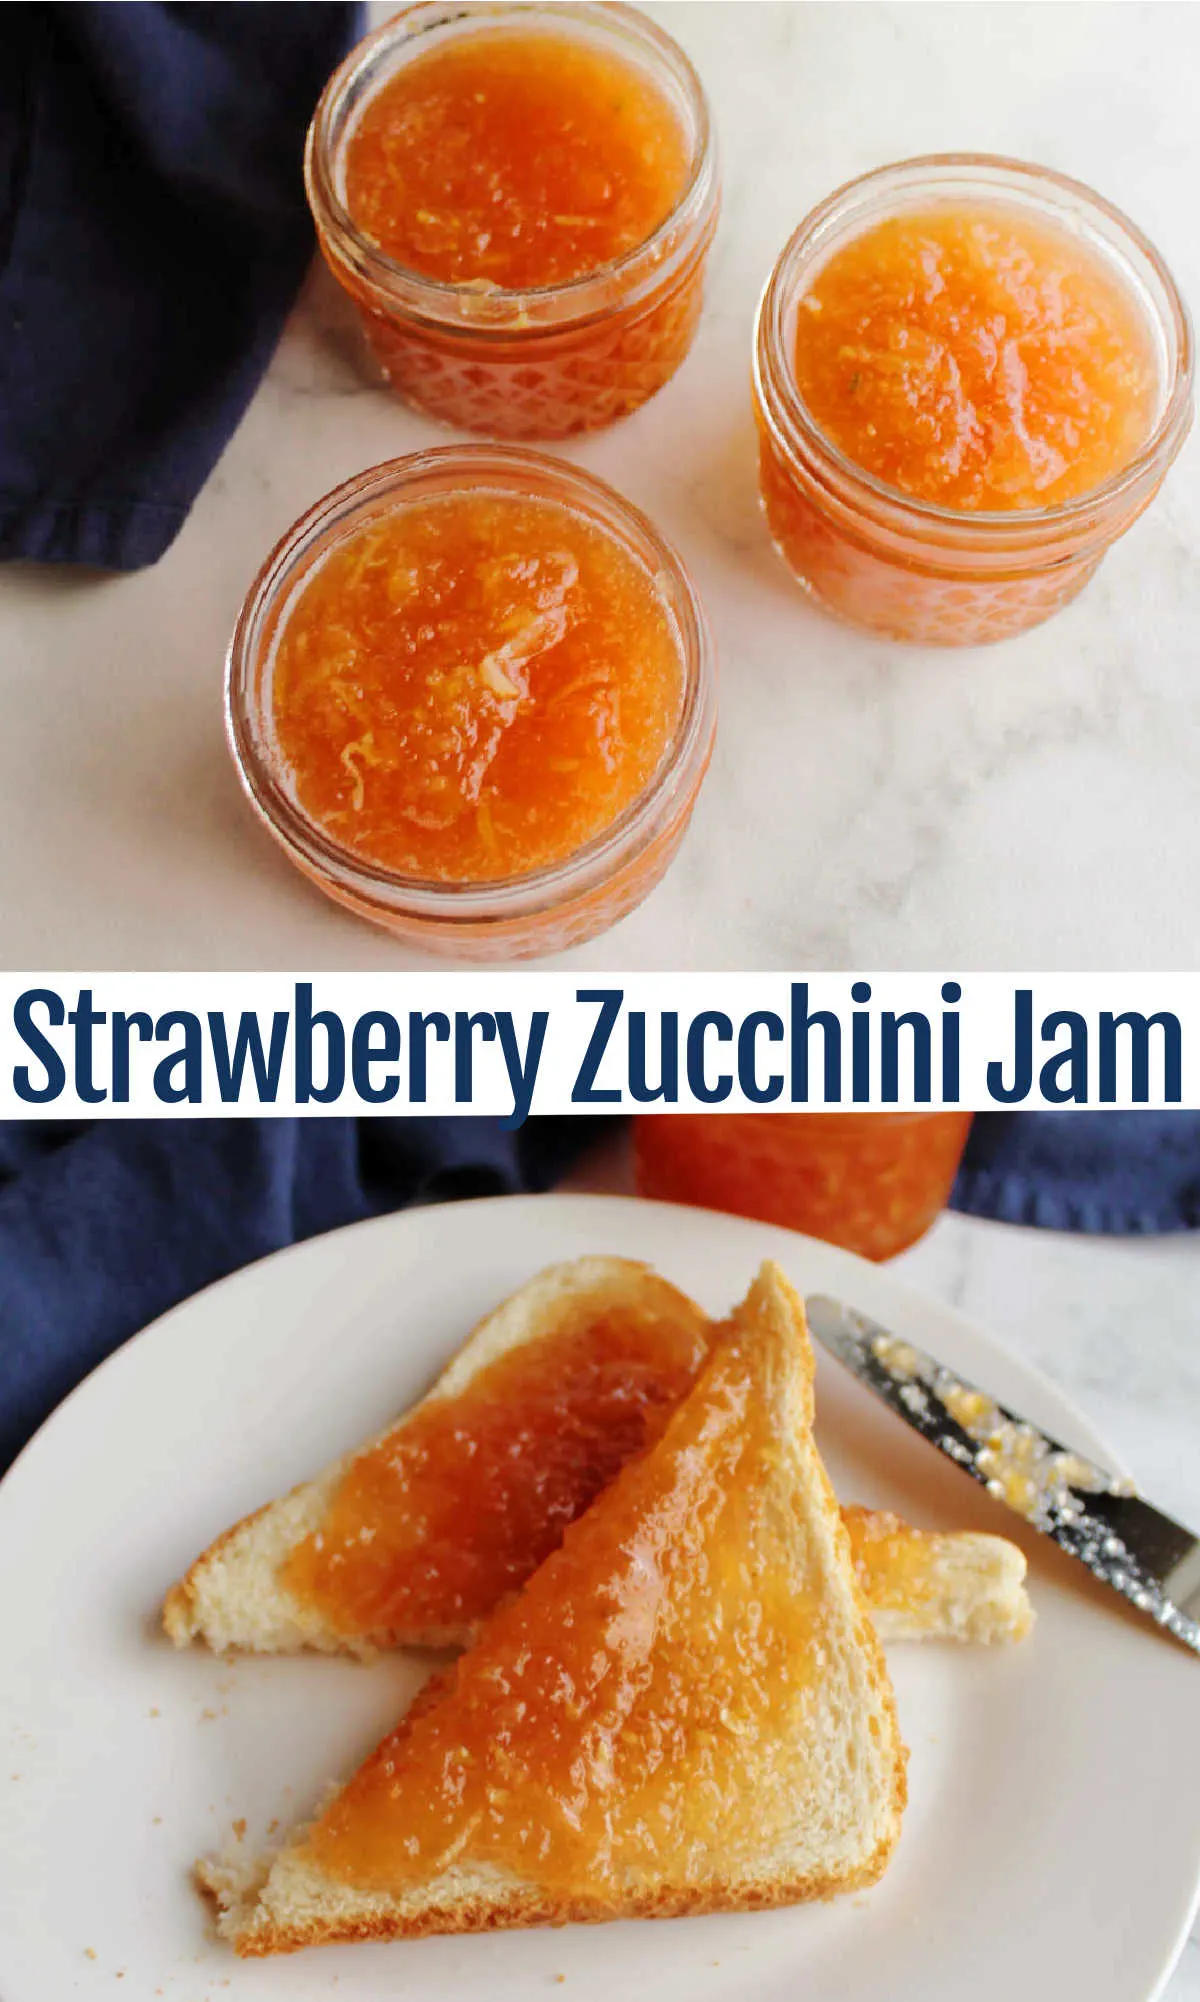 This mock strawberry zucchini jam is such a fabulous way to turn your summer squash harvest into something unexpected and delicious. It is quick to put together and fabulous spread over toast or swirled into yogurt.